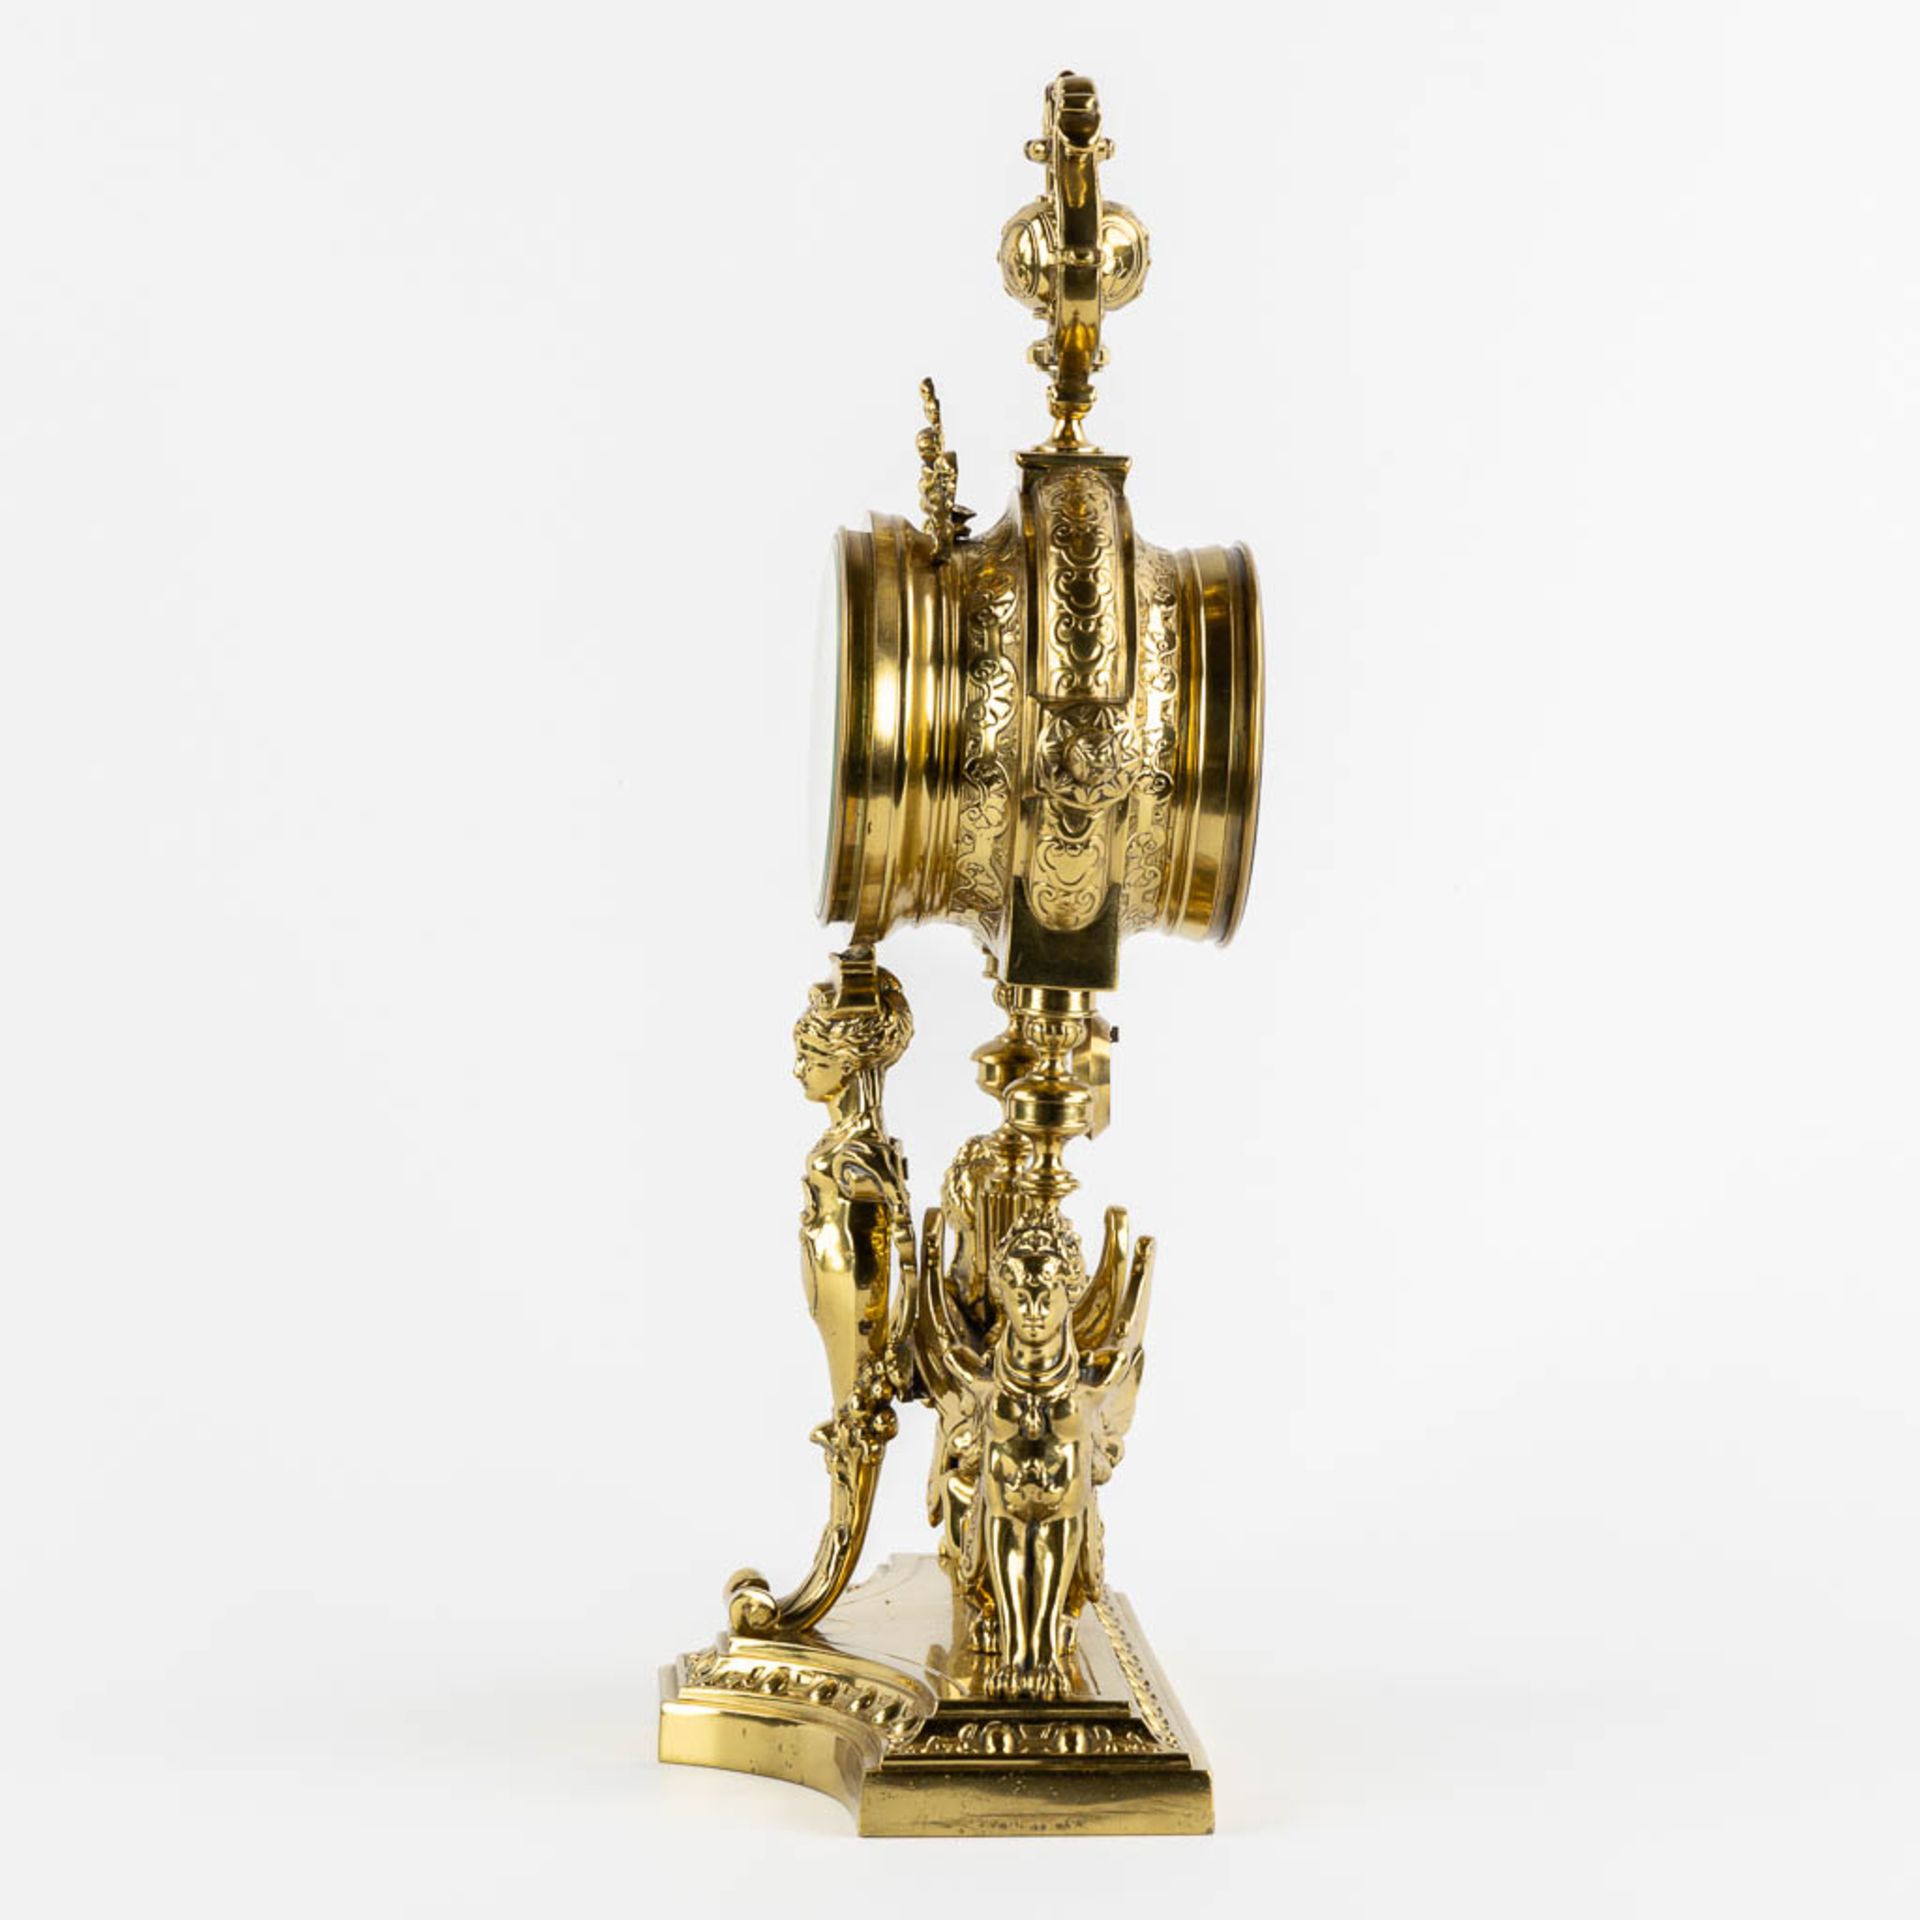 A mantle clock, polished bronze, decorated with Mythological Figures. Circa 1880. (L:15 x W:26 x H:4 - Image 6 of 12